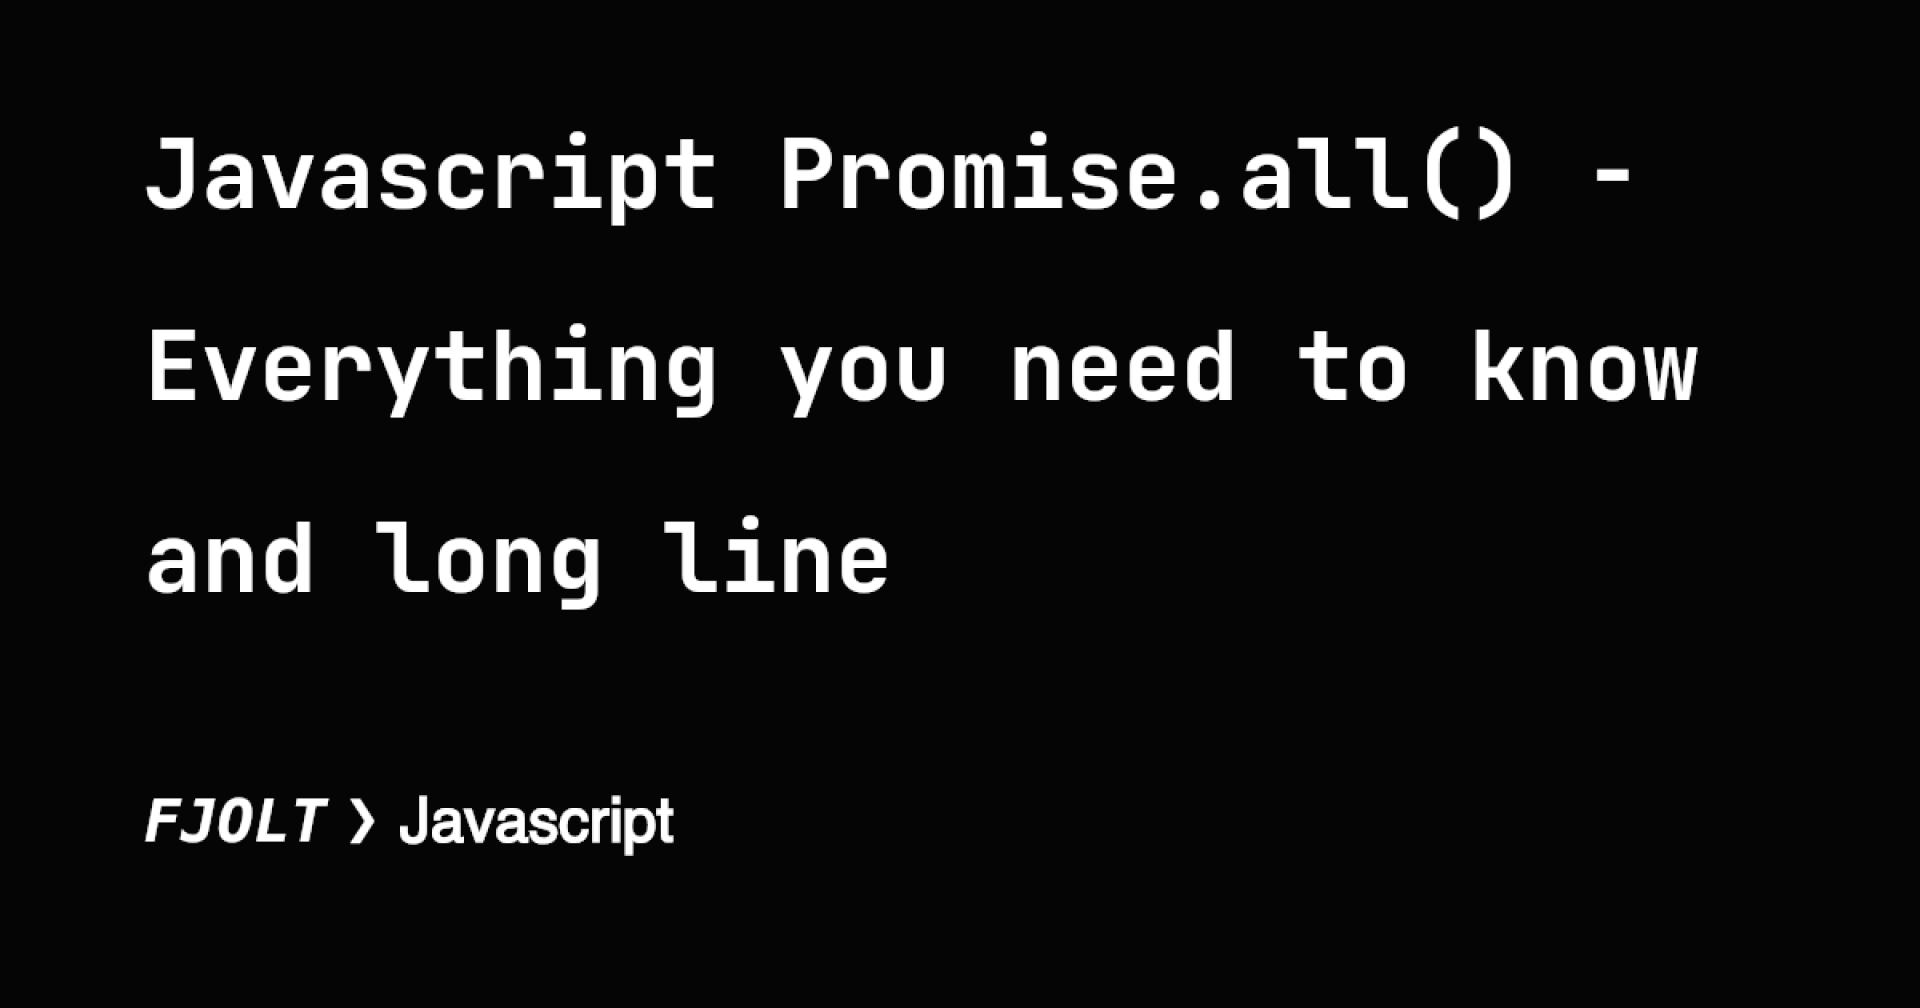 Javascript Promise.all() - Everything you need to know